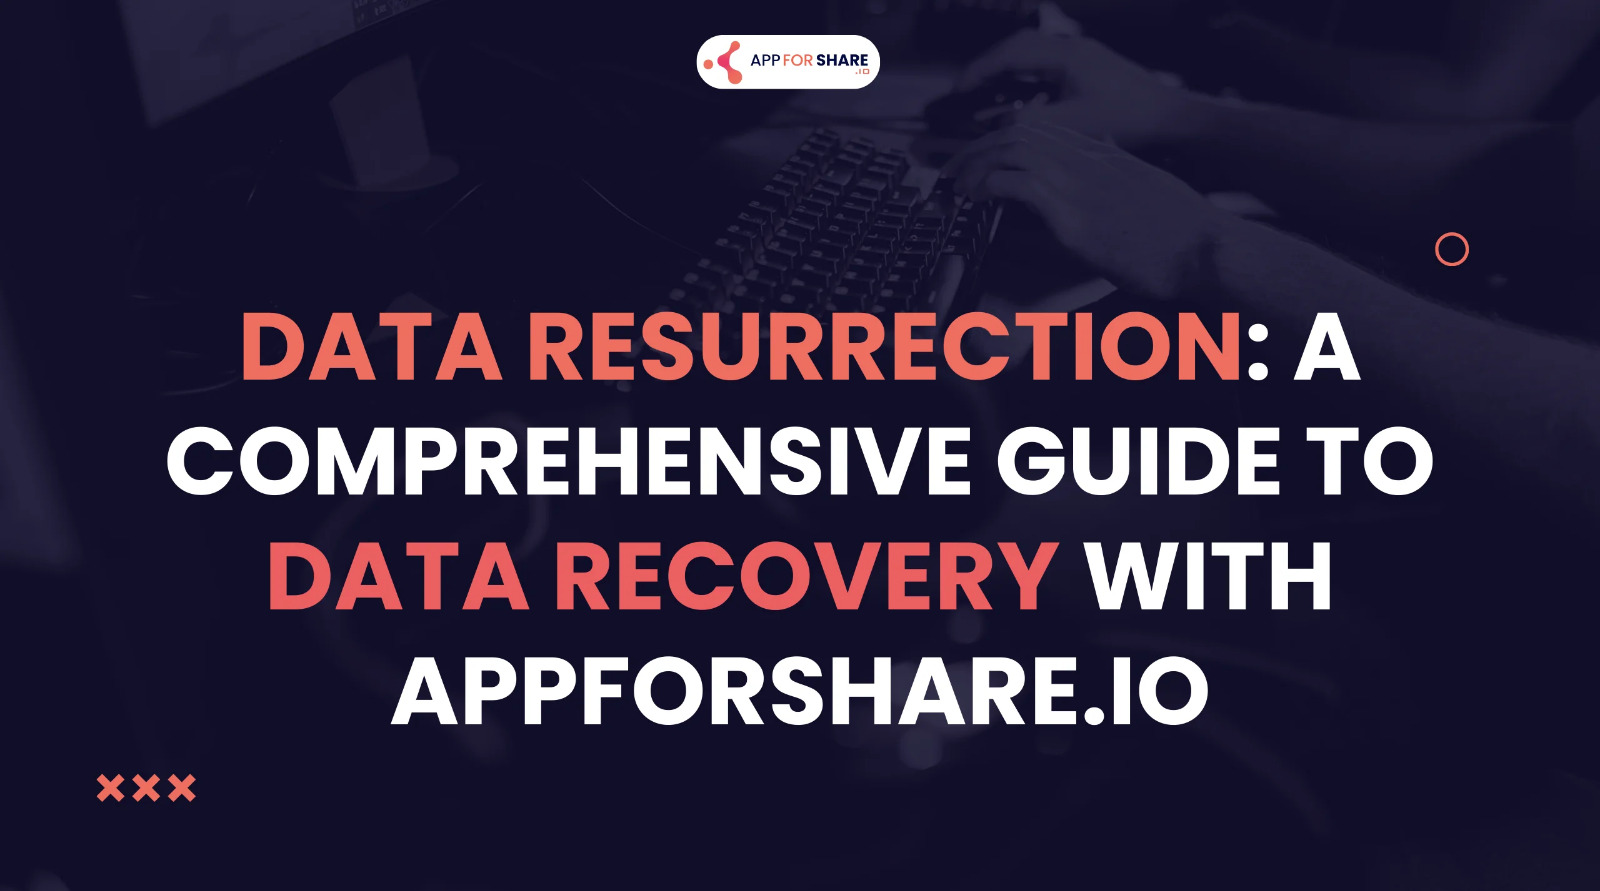 You are currently viewing Data Resurrection: A Comprehensive Guide to Data Recovery with AppForShare.io